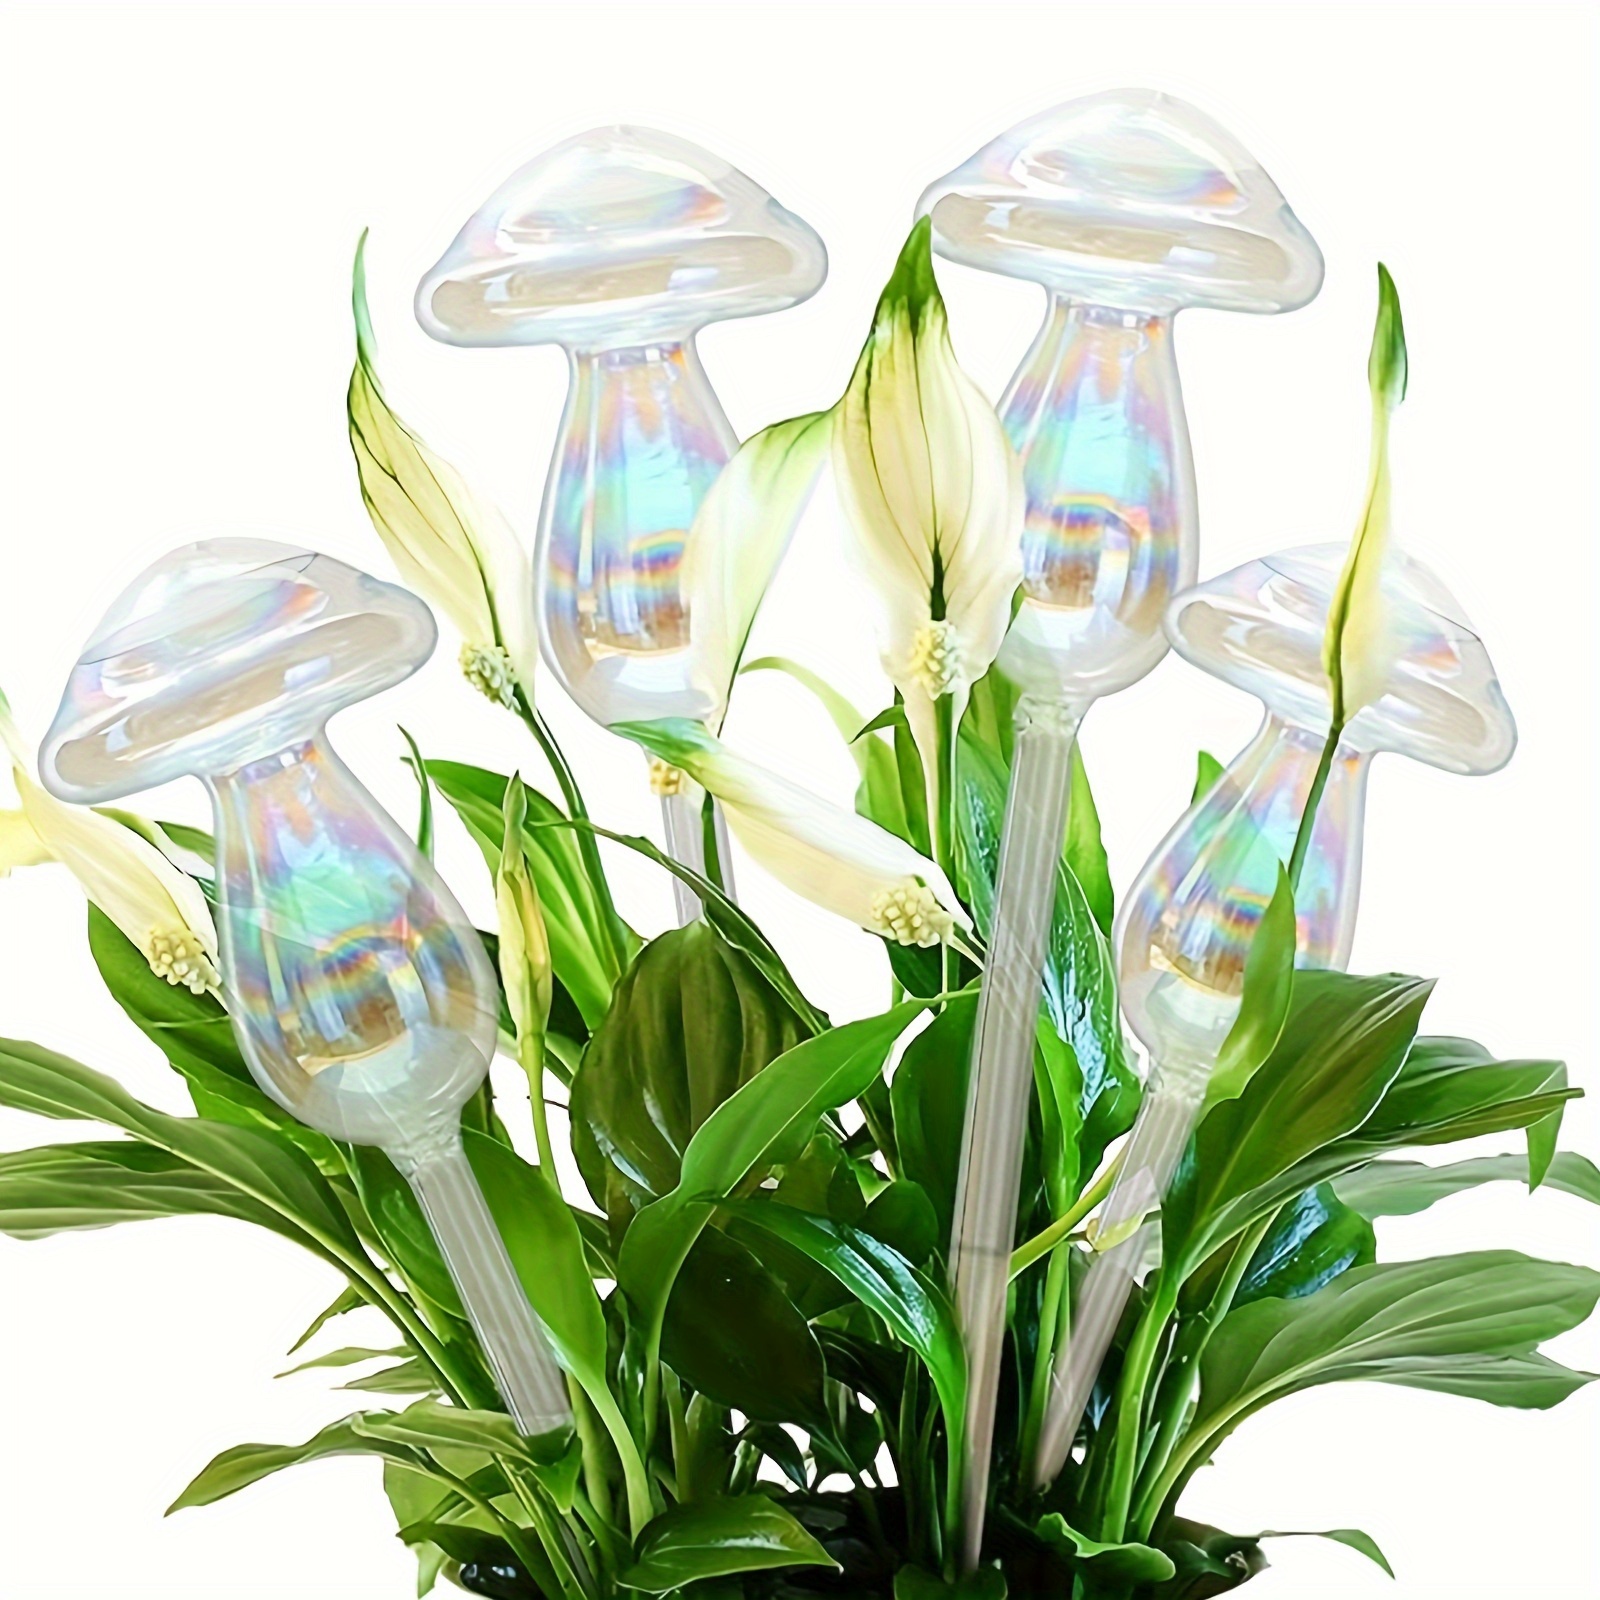 

4pcs, Plant Watering Globes Iridescent Rainbow Gradient Color Clear Mushroom Self Watering Spikes Plant Watering Bulbs Devices For Indoor And Outdoor Plants Measures 9" L X 2.7" D